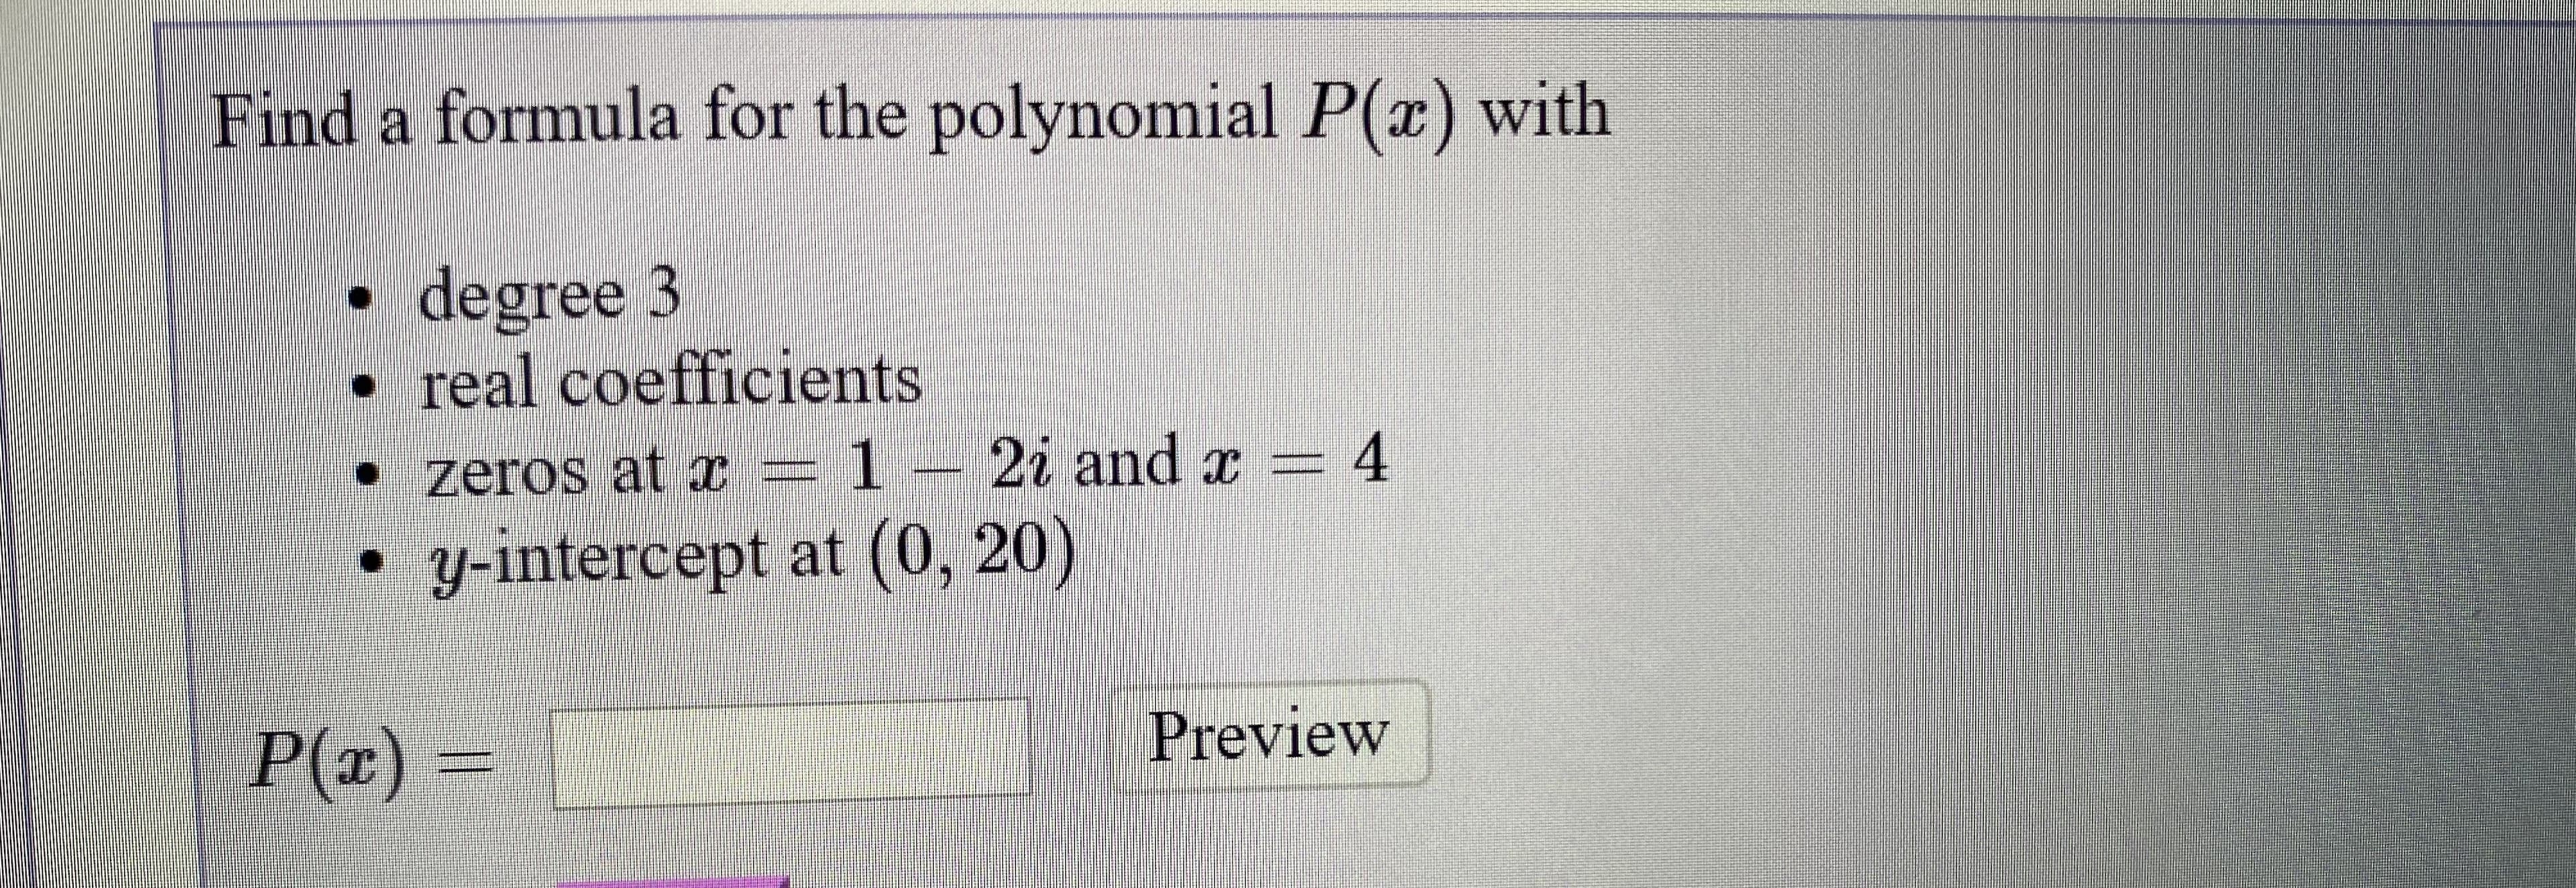 Find a formula for the polynomial P(x) with
degree 3
• real coefficients
-D1
y-intercept at (0, 20)
zeros at x = 1 – 2i and x = 4
P(z)%3D
Preview
